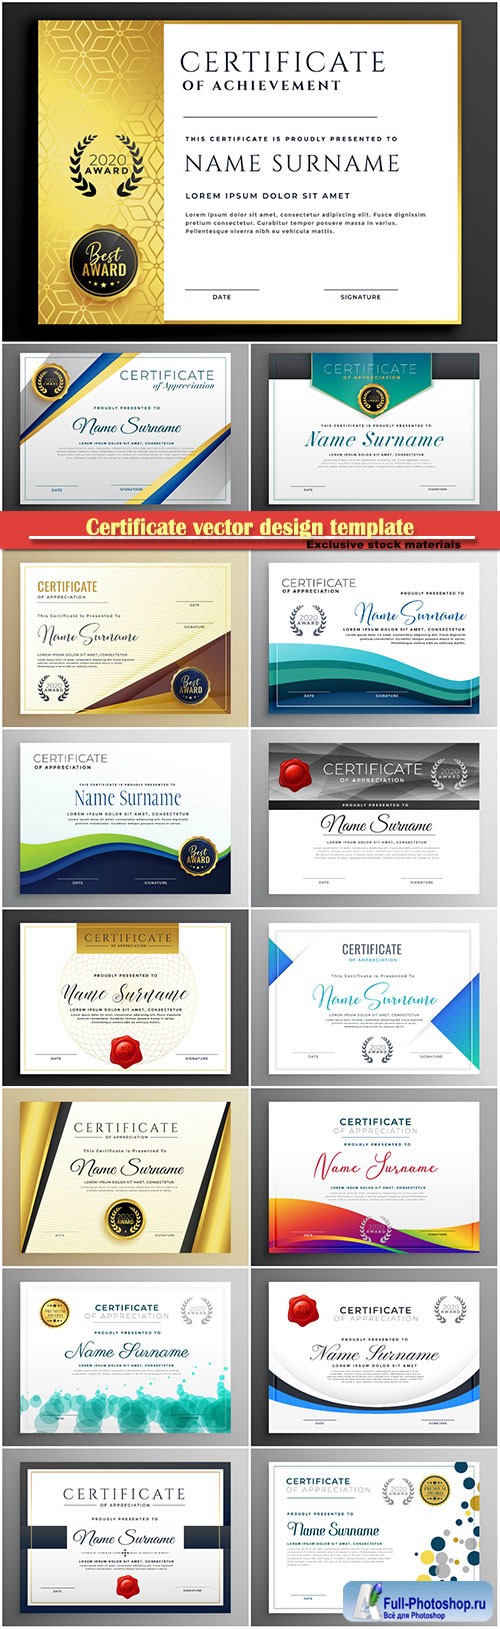 Certificate and vector diploma design template # 62